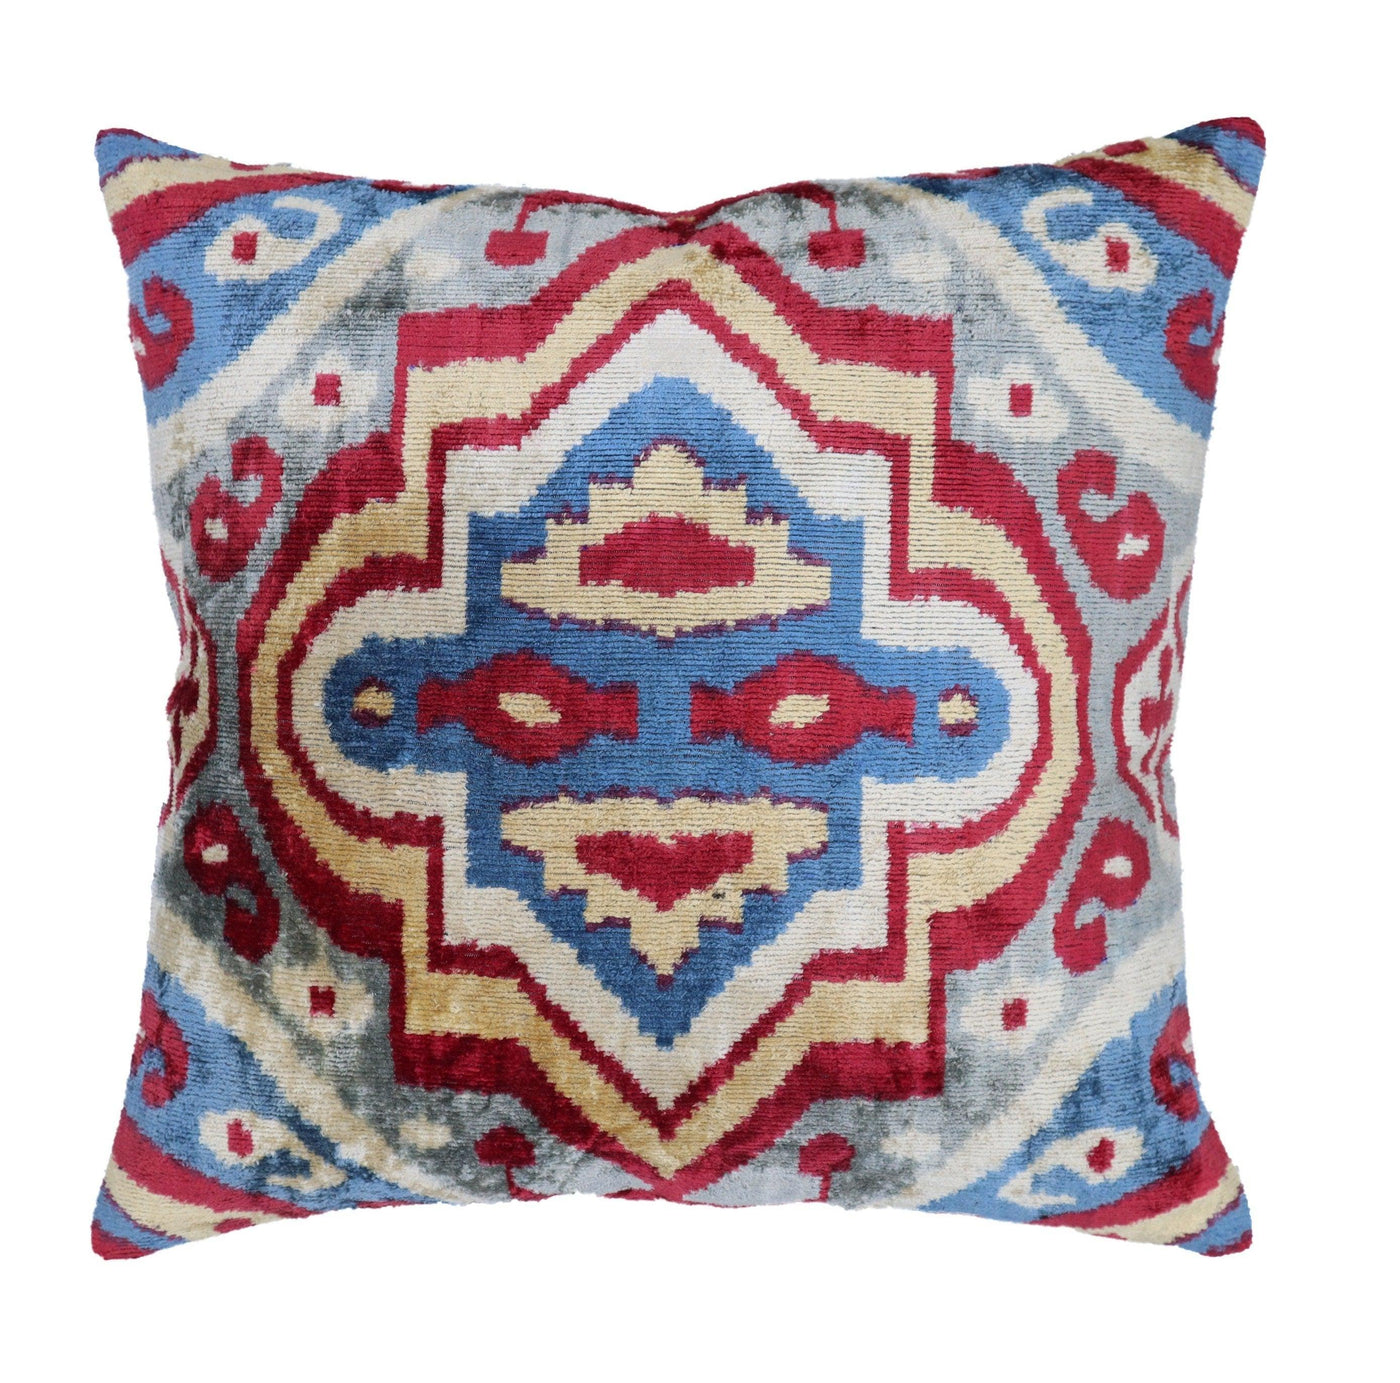 Canvello Handmade Colorful Pillows For Couch | 20 x 20 in (50 x 50 cm)